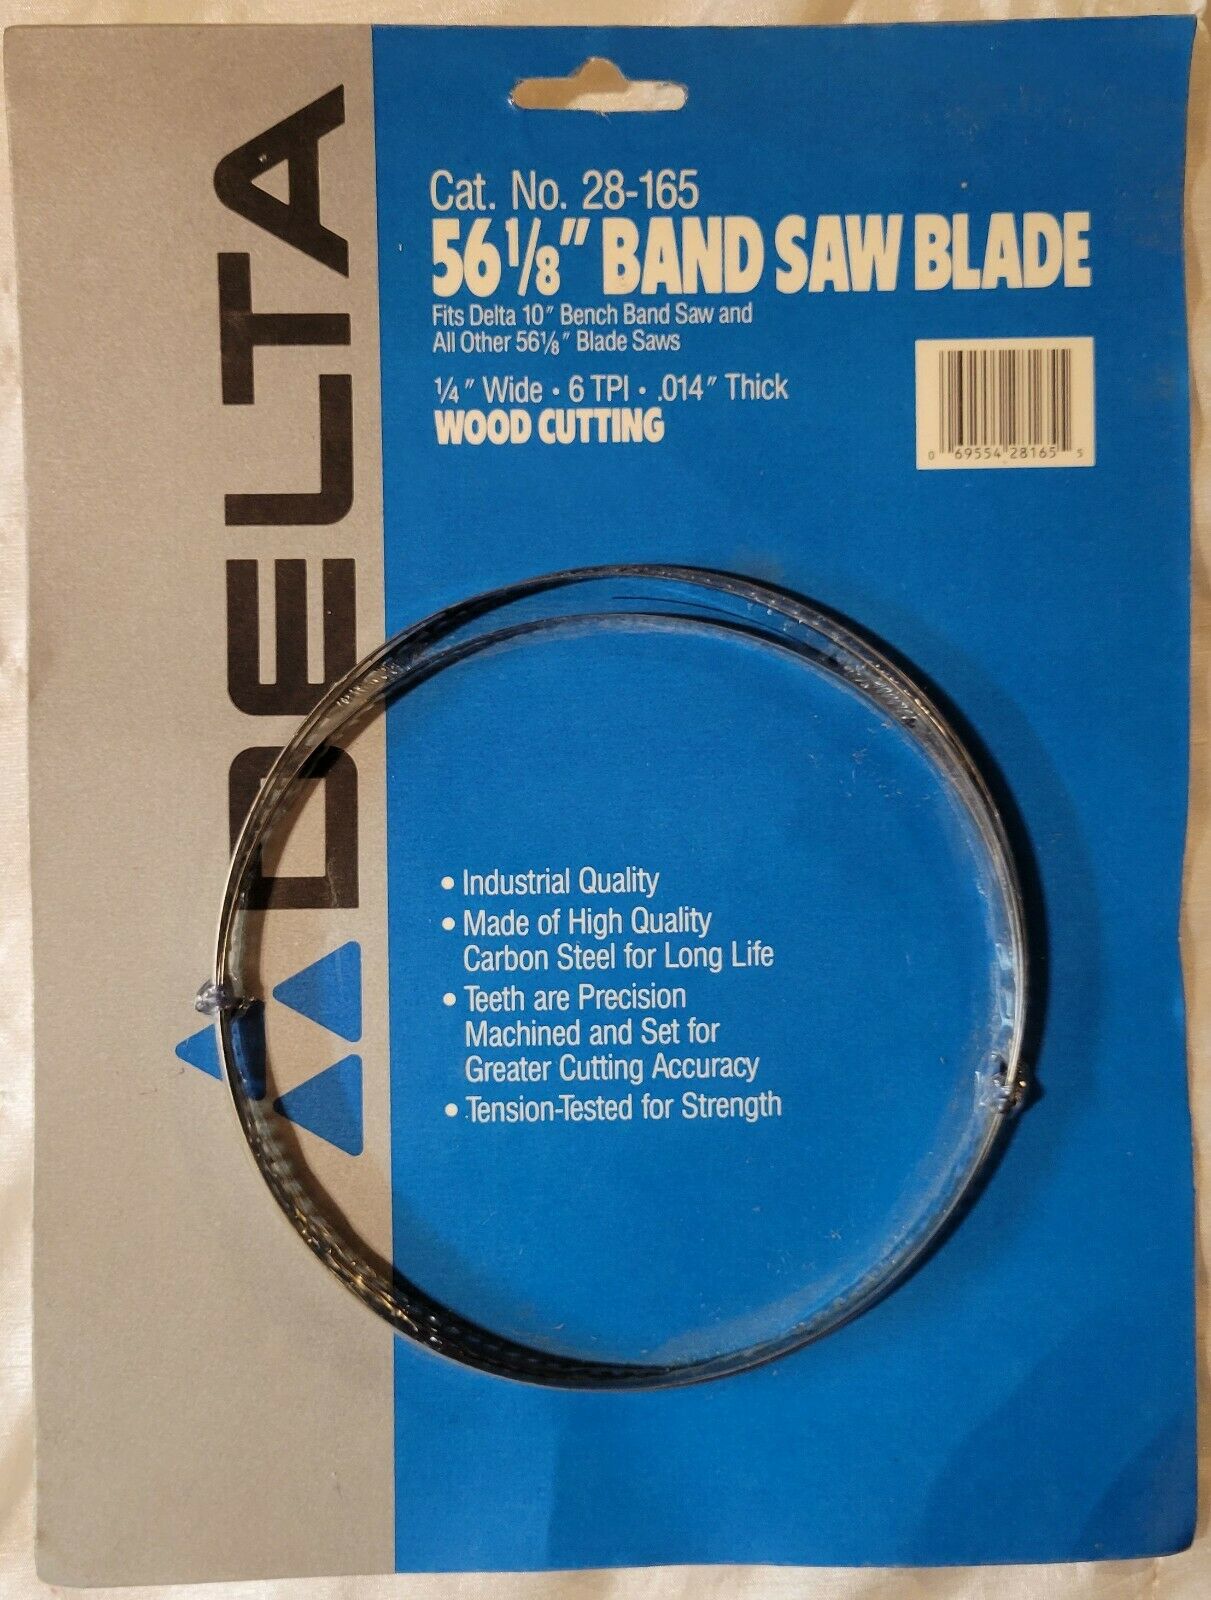 Delta 56 1/8" Band Saw Blade 1/4" Wide Wood Cutting New In Package